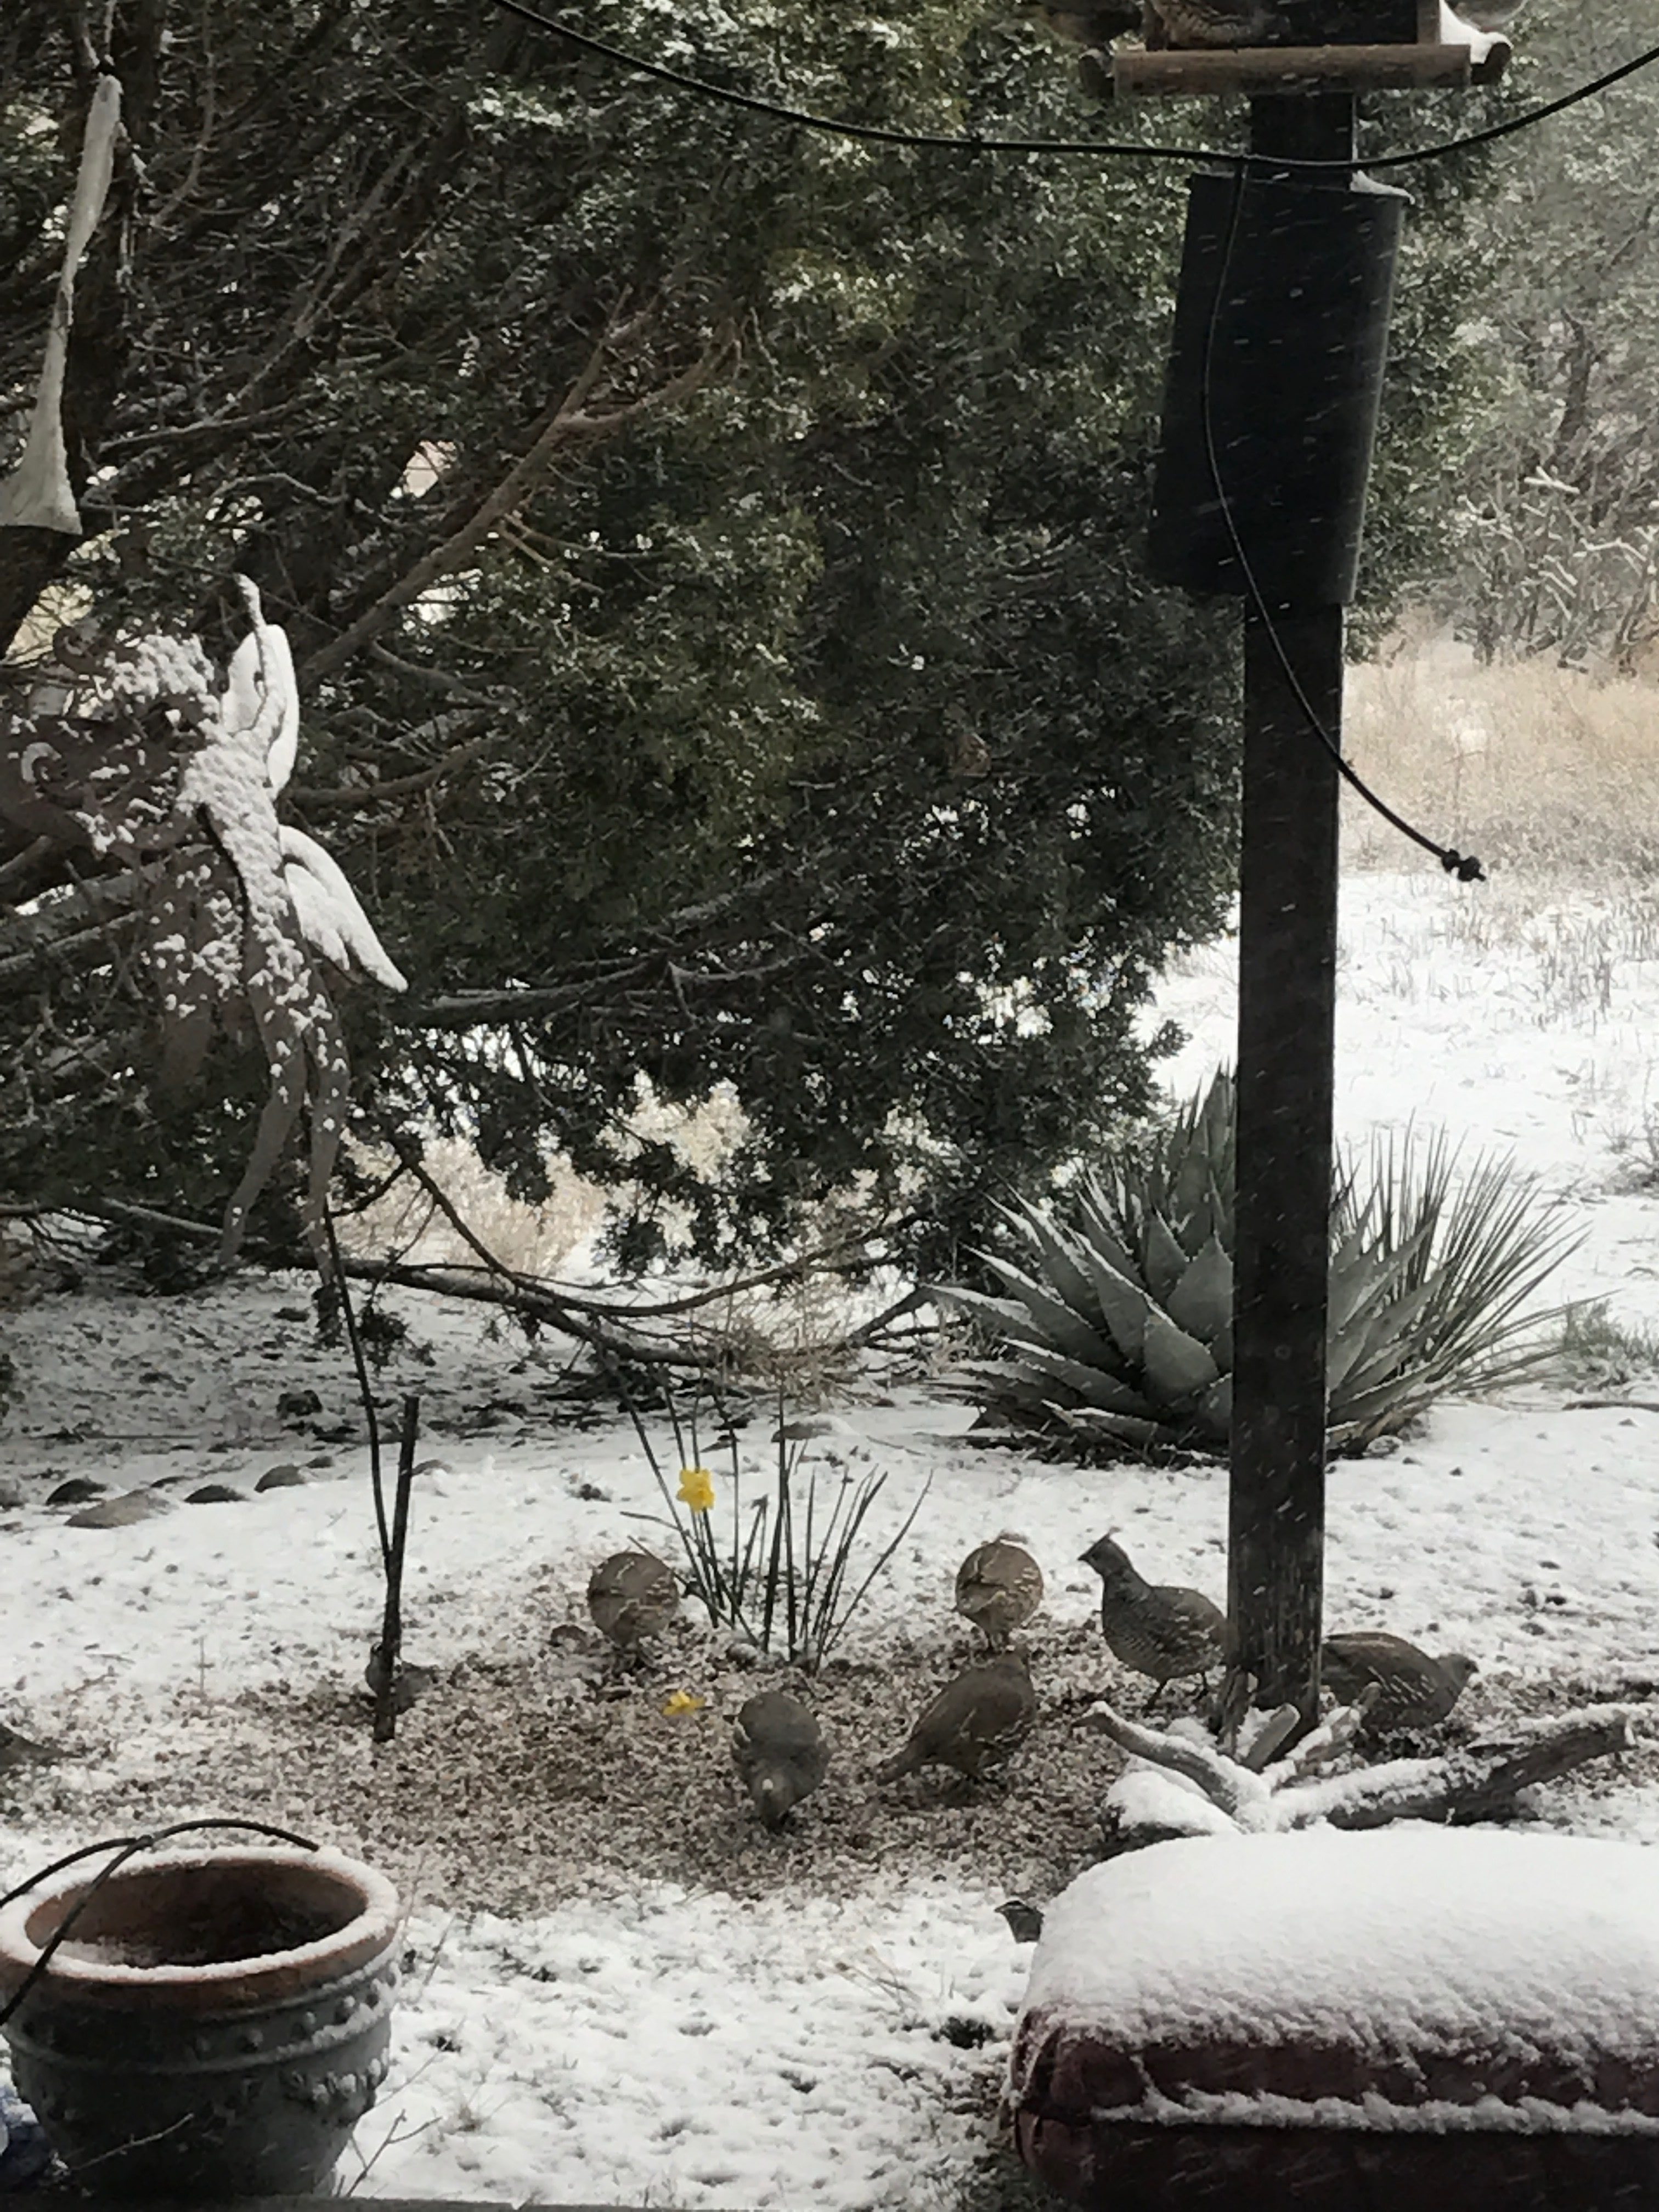 quail scuffing in the April snow for seed